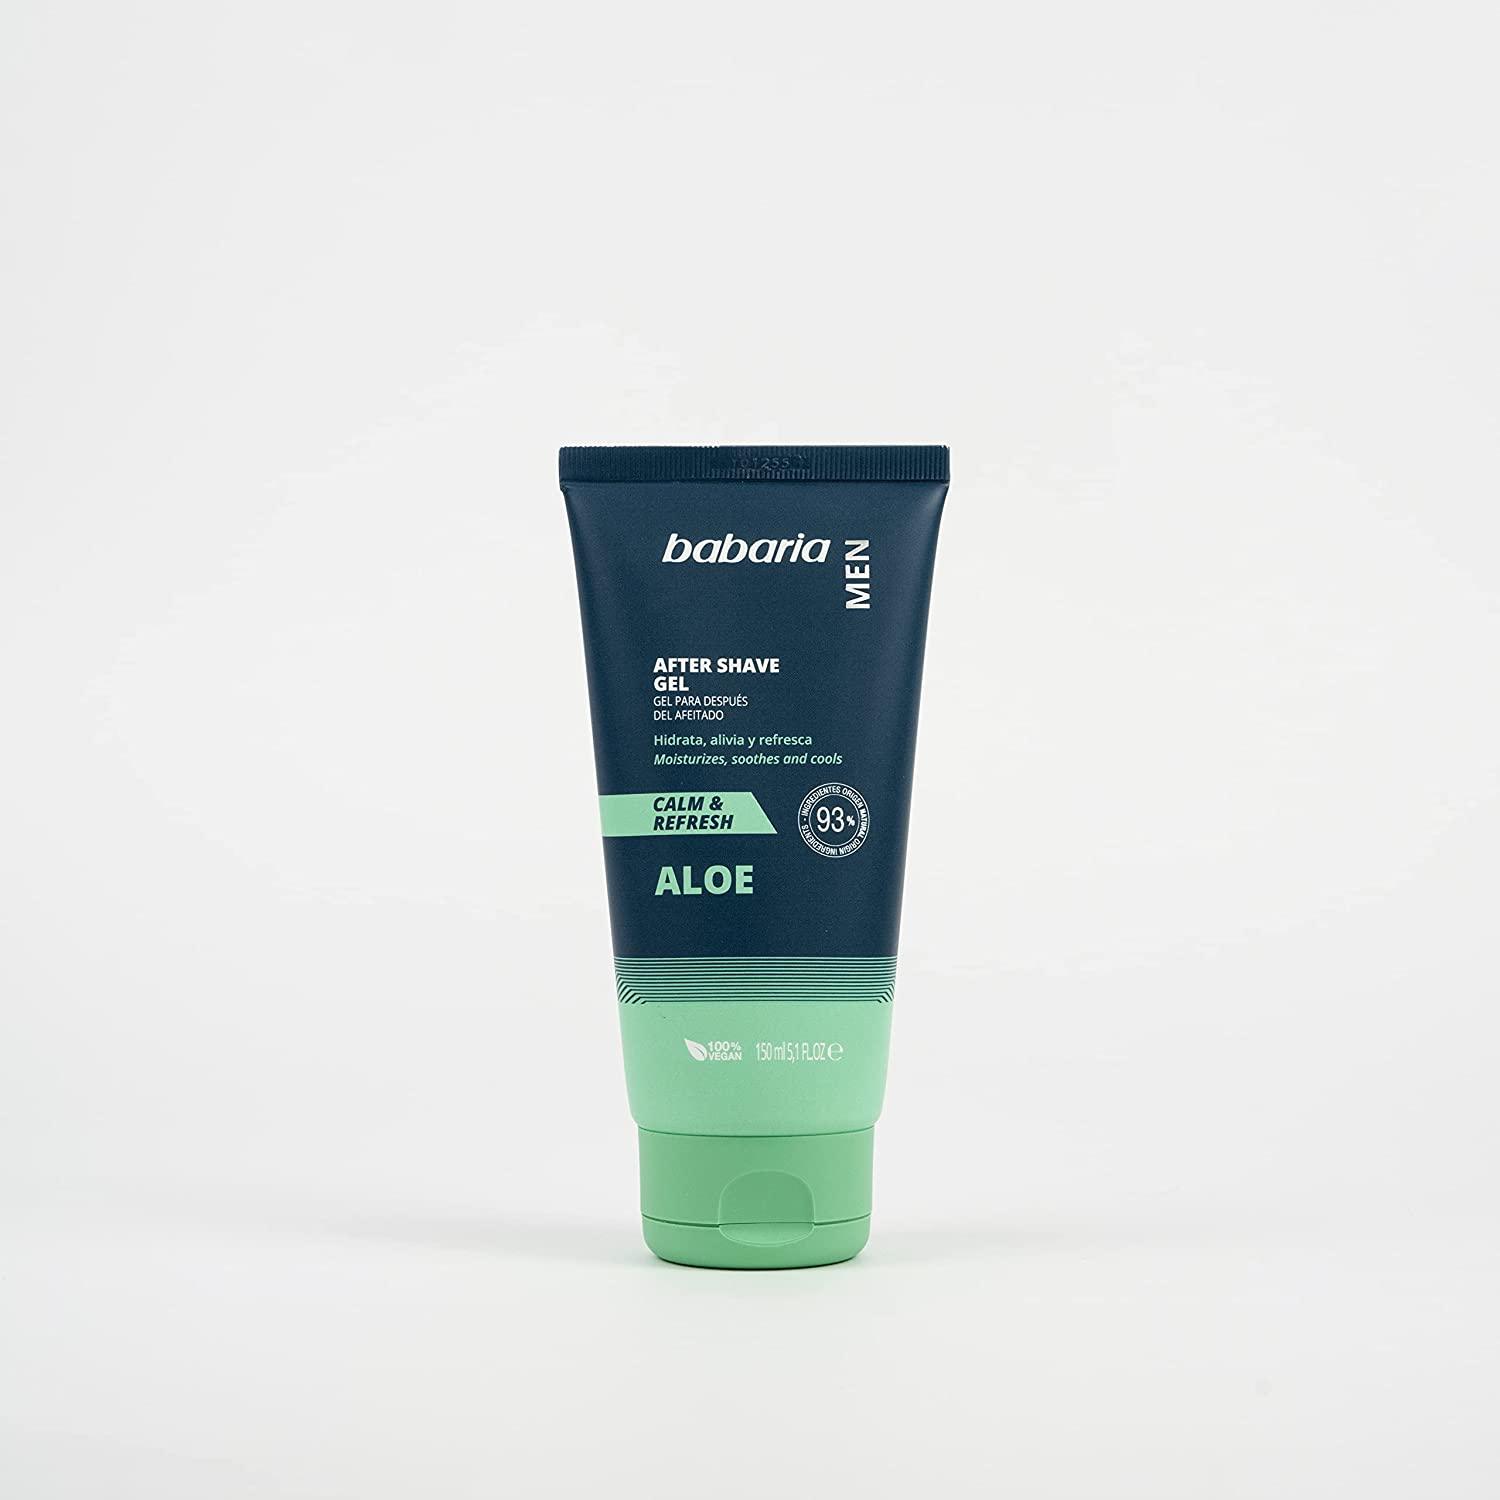 BABARIA AFTER SHAVE GEL - Wellness Shoppee